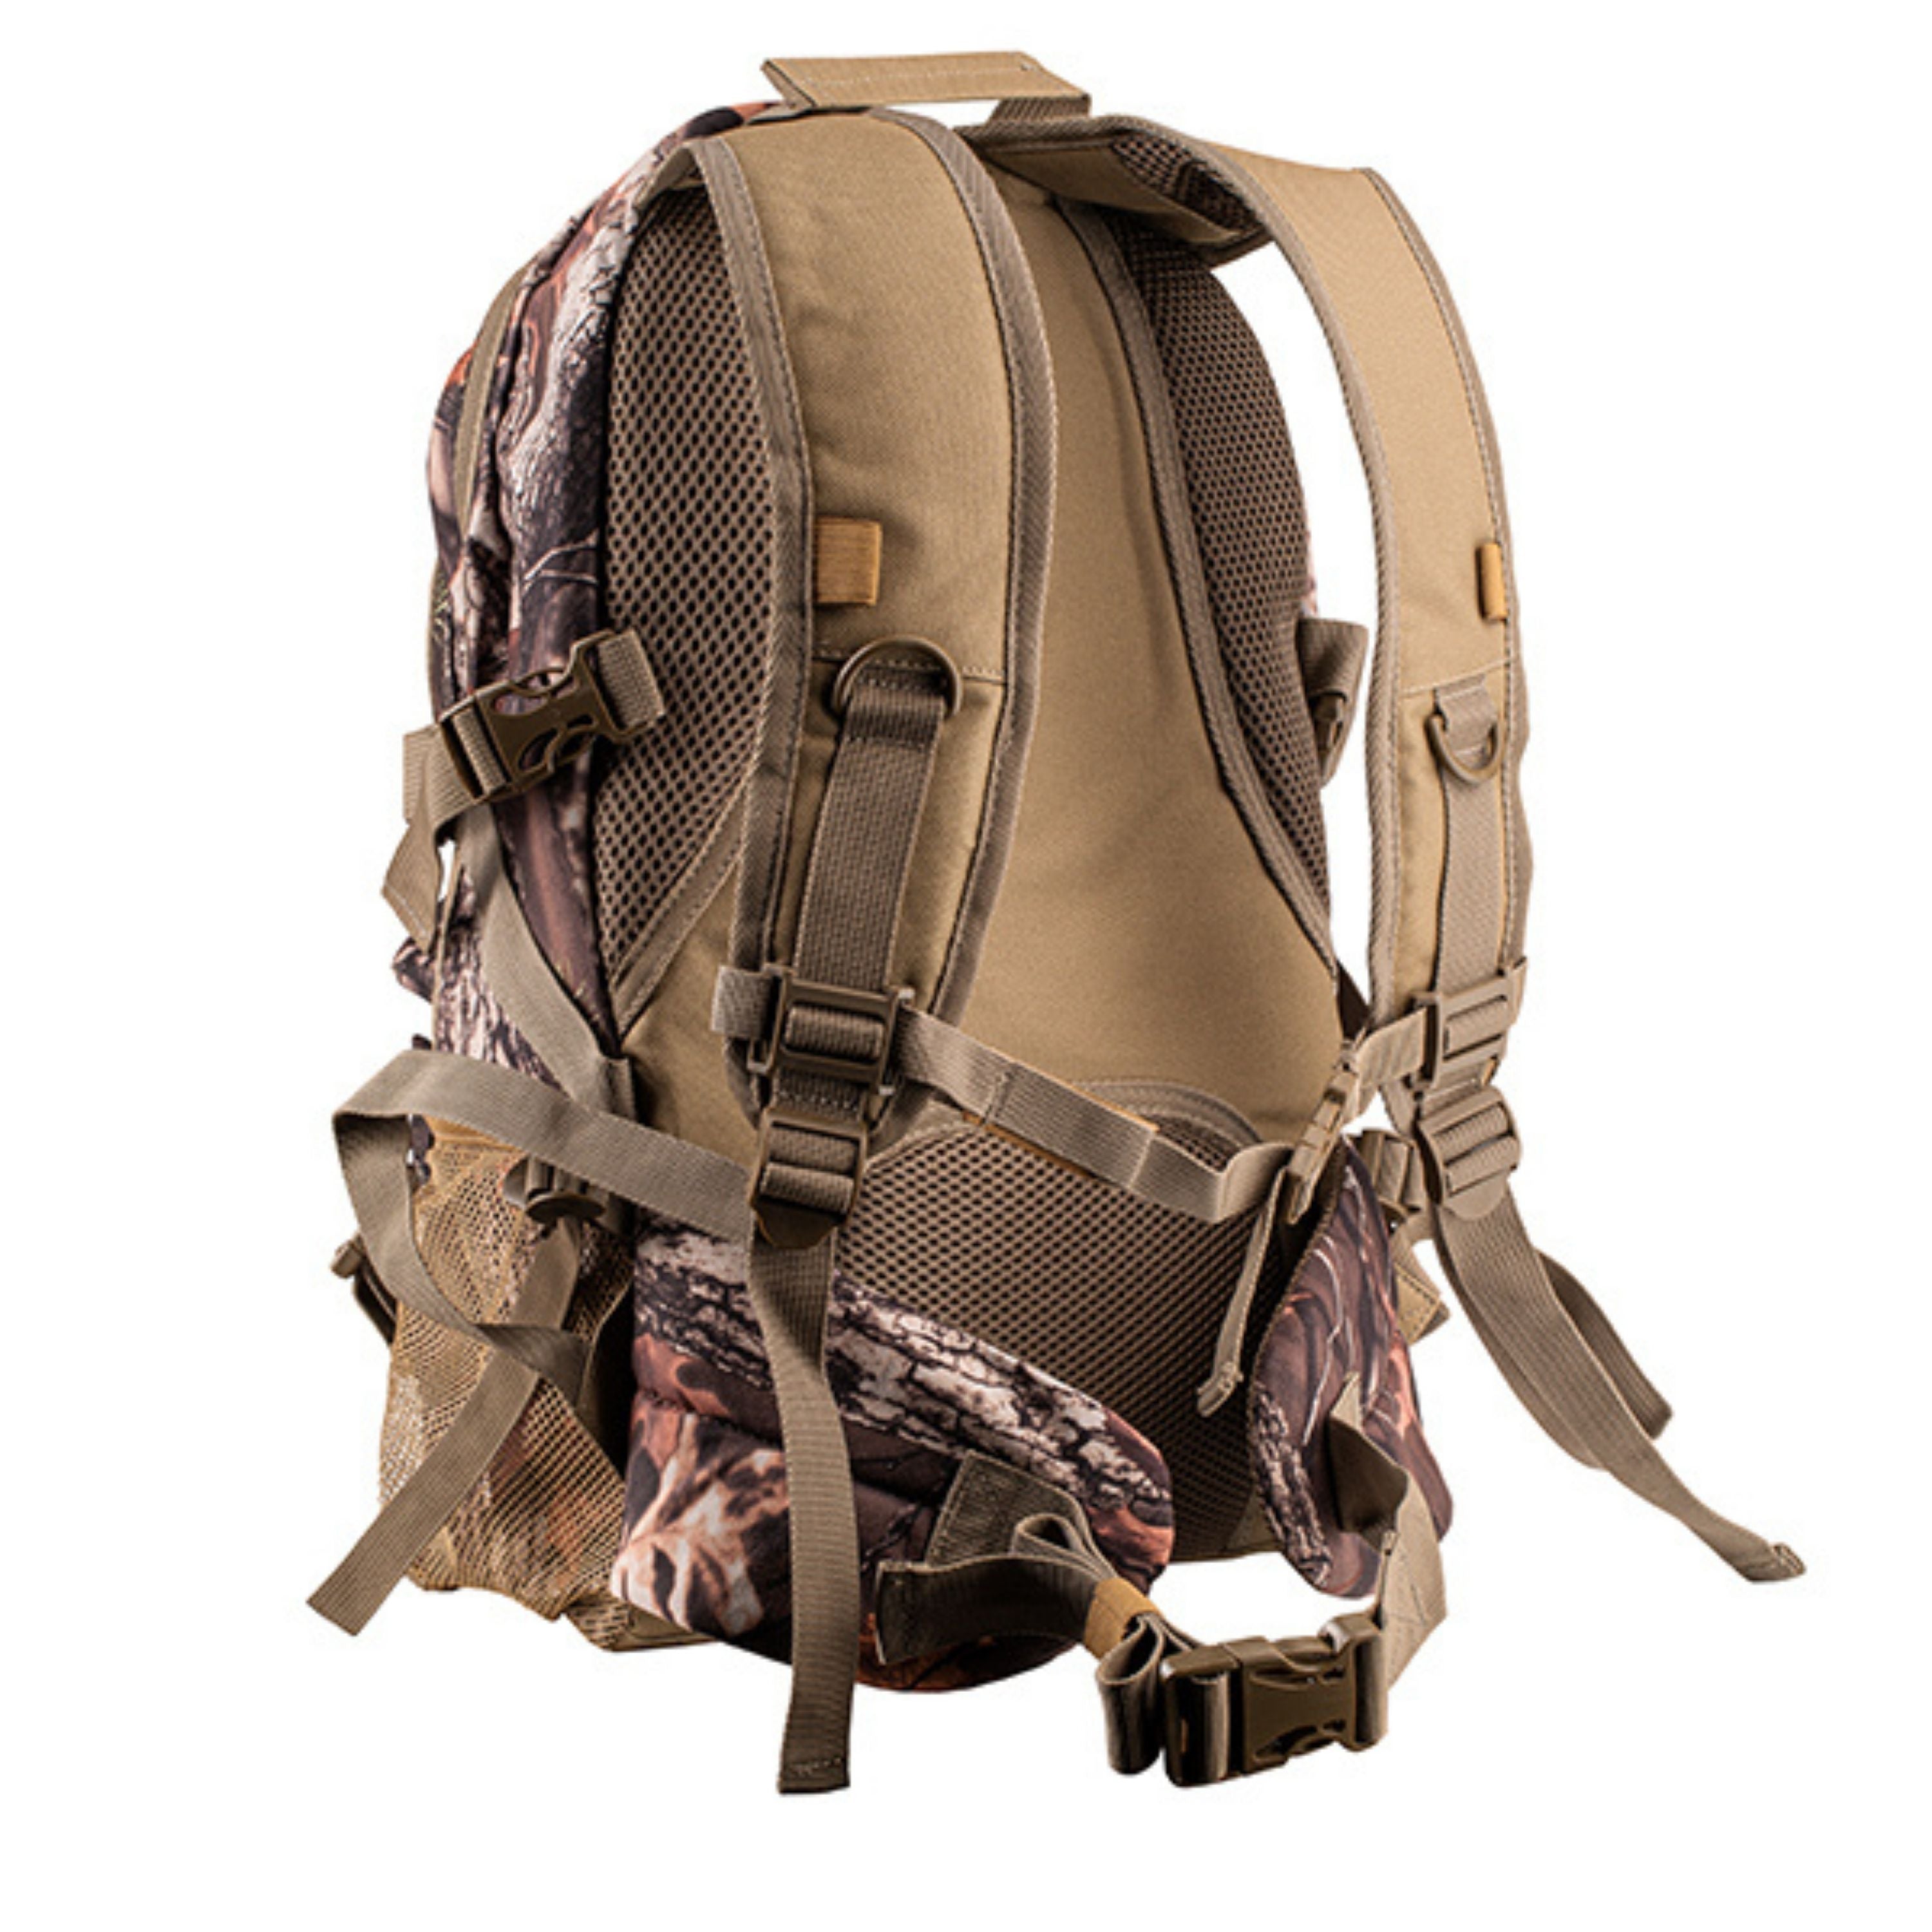 Sac à dos "Wood expedition" - 30 L||"Wood Expedition" Backpack - 30 L